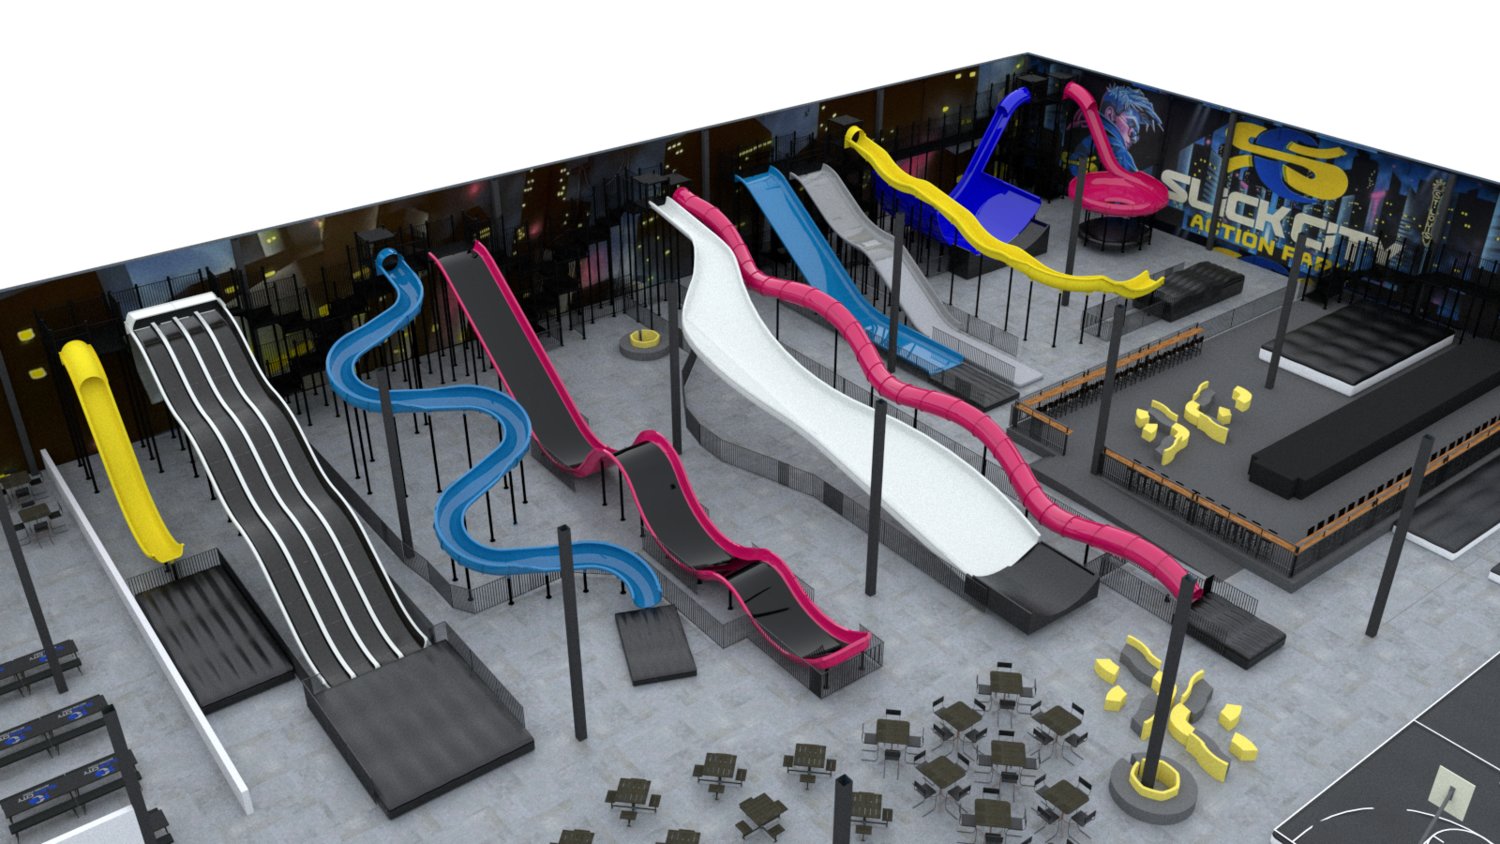 An artist rendition of Slick Park Action Park, touted as the world’s first indoor slide Park and sports court. The slides have no water and the park is designed for patrons of all ages.